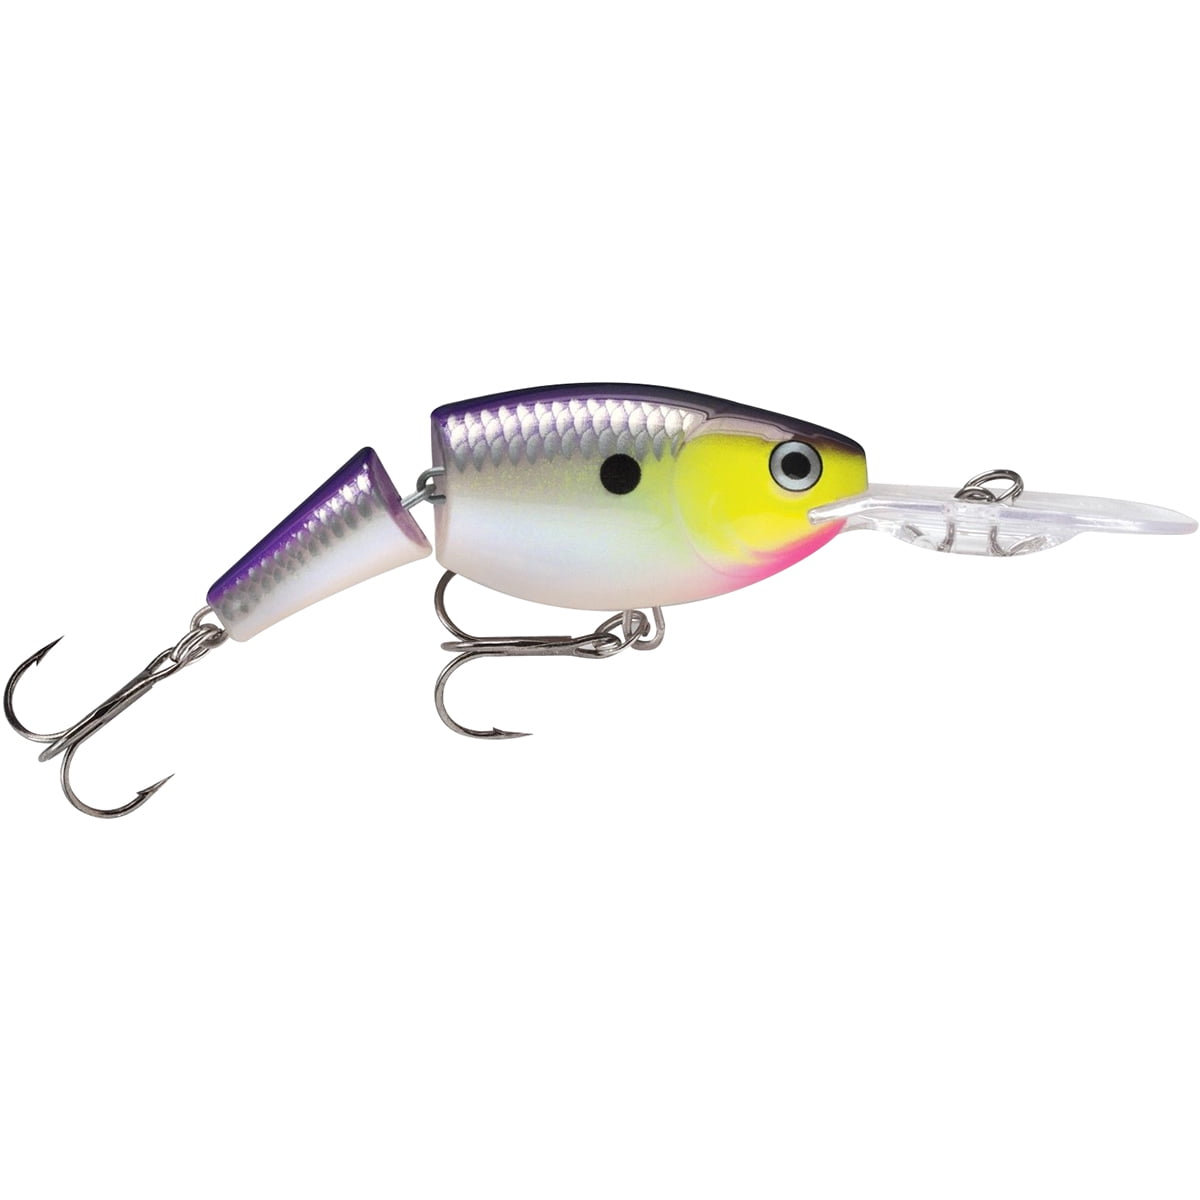 Purpledescent Rapala Jointed Shad Rap 07 Fishing Lure 